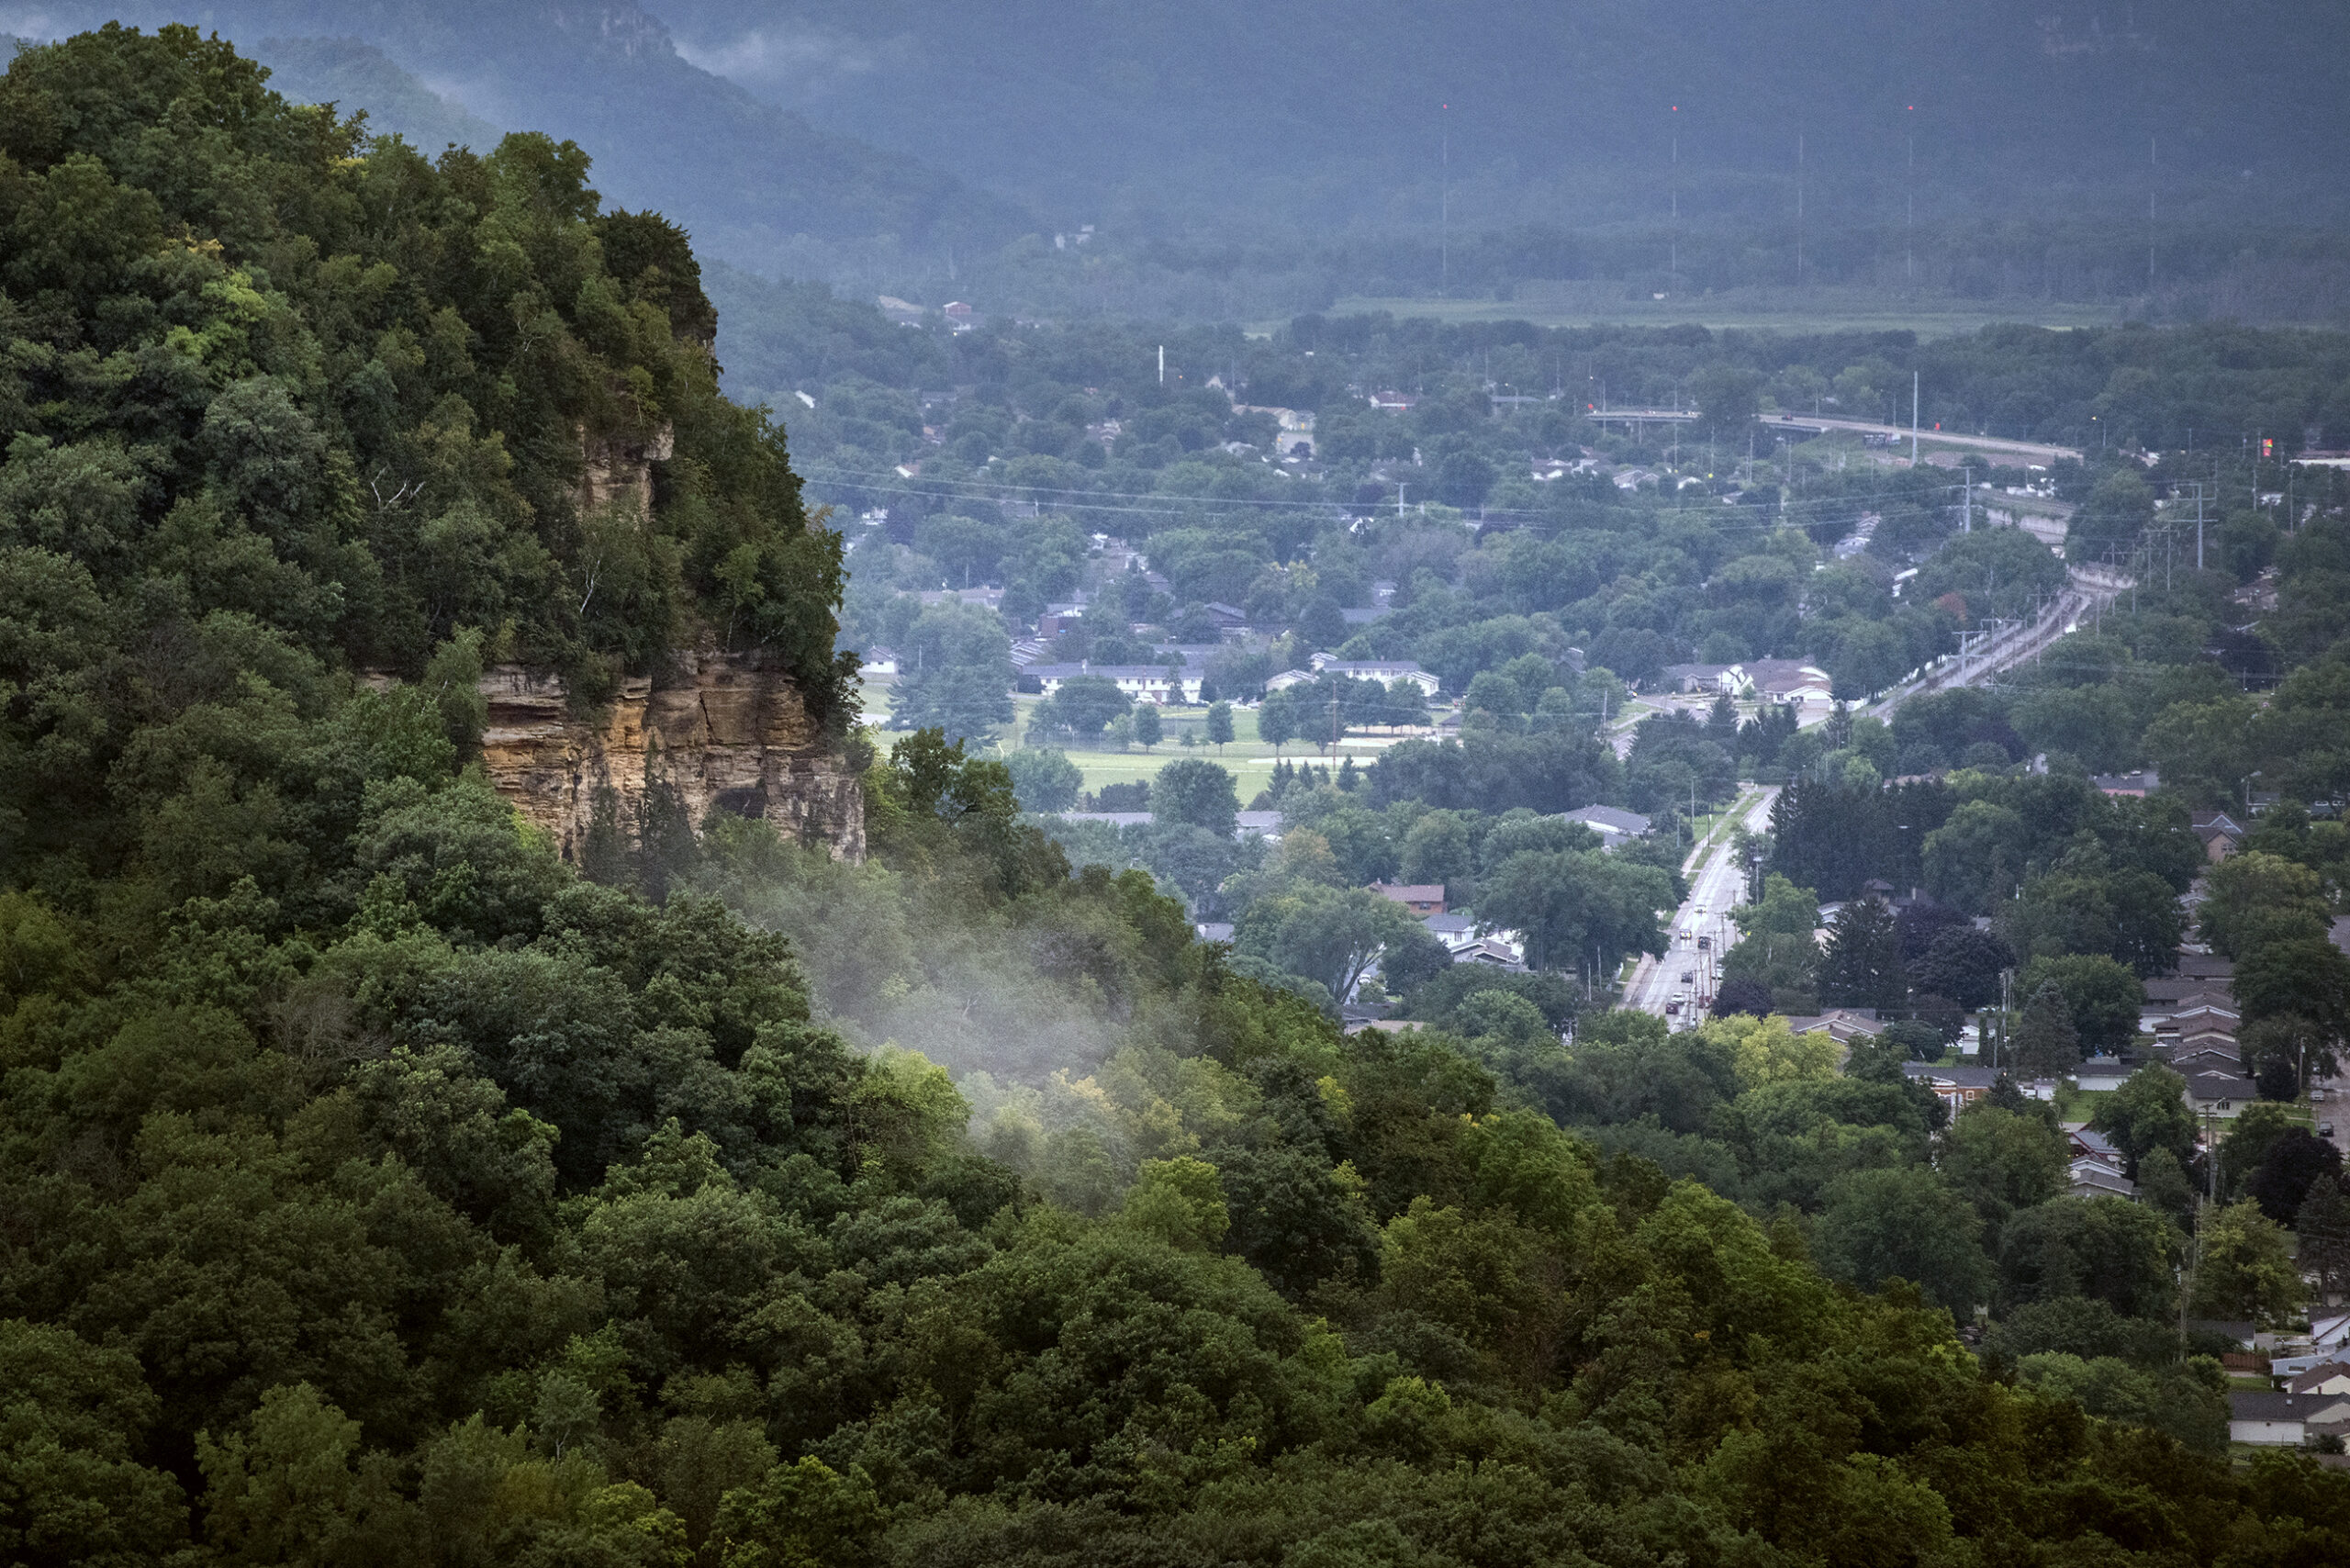 A cloud of mist on the side of a hill with green trees is seen high above the city landscape below.